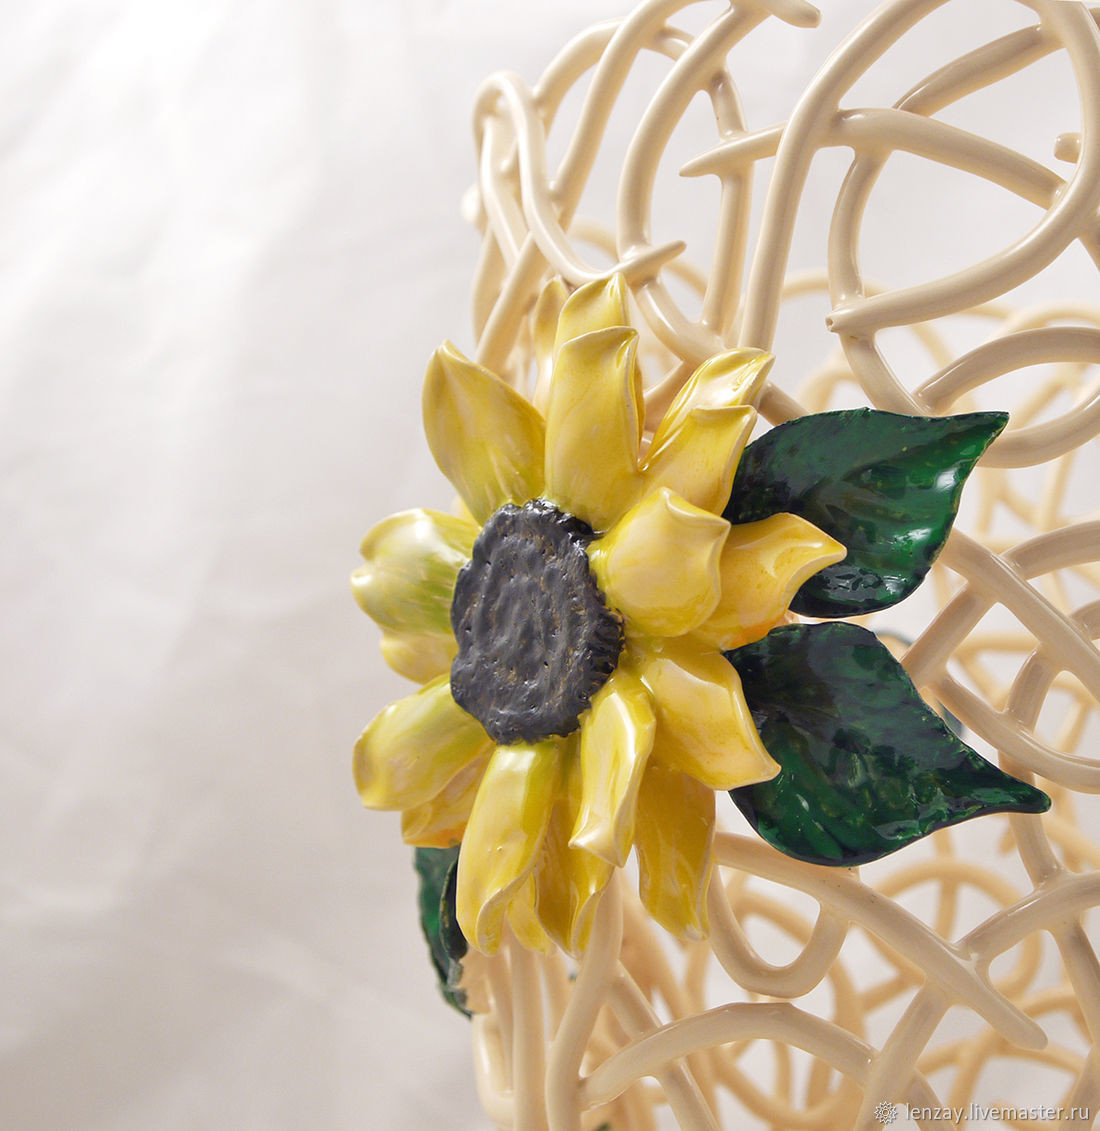 Cone Shaped Vase Of Wicker Vase Sunflower Cone Height 25 Cm Shop Online On Inside Height 25 Cm Ceramic Vase From the Collection Of Sunflowers Truncated Cone